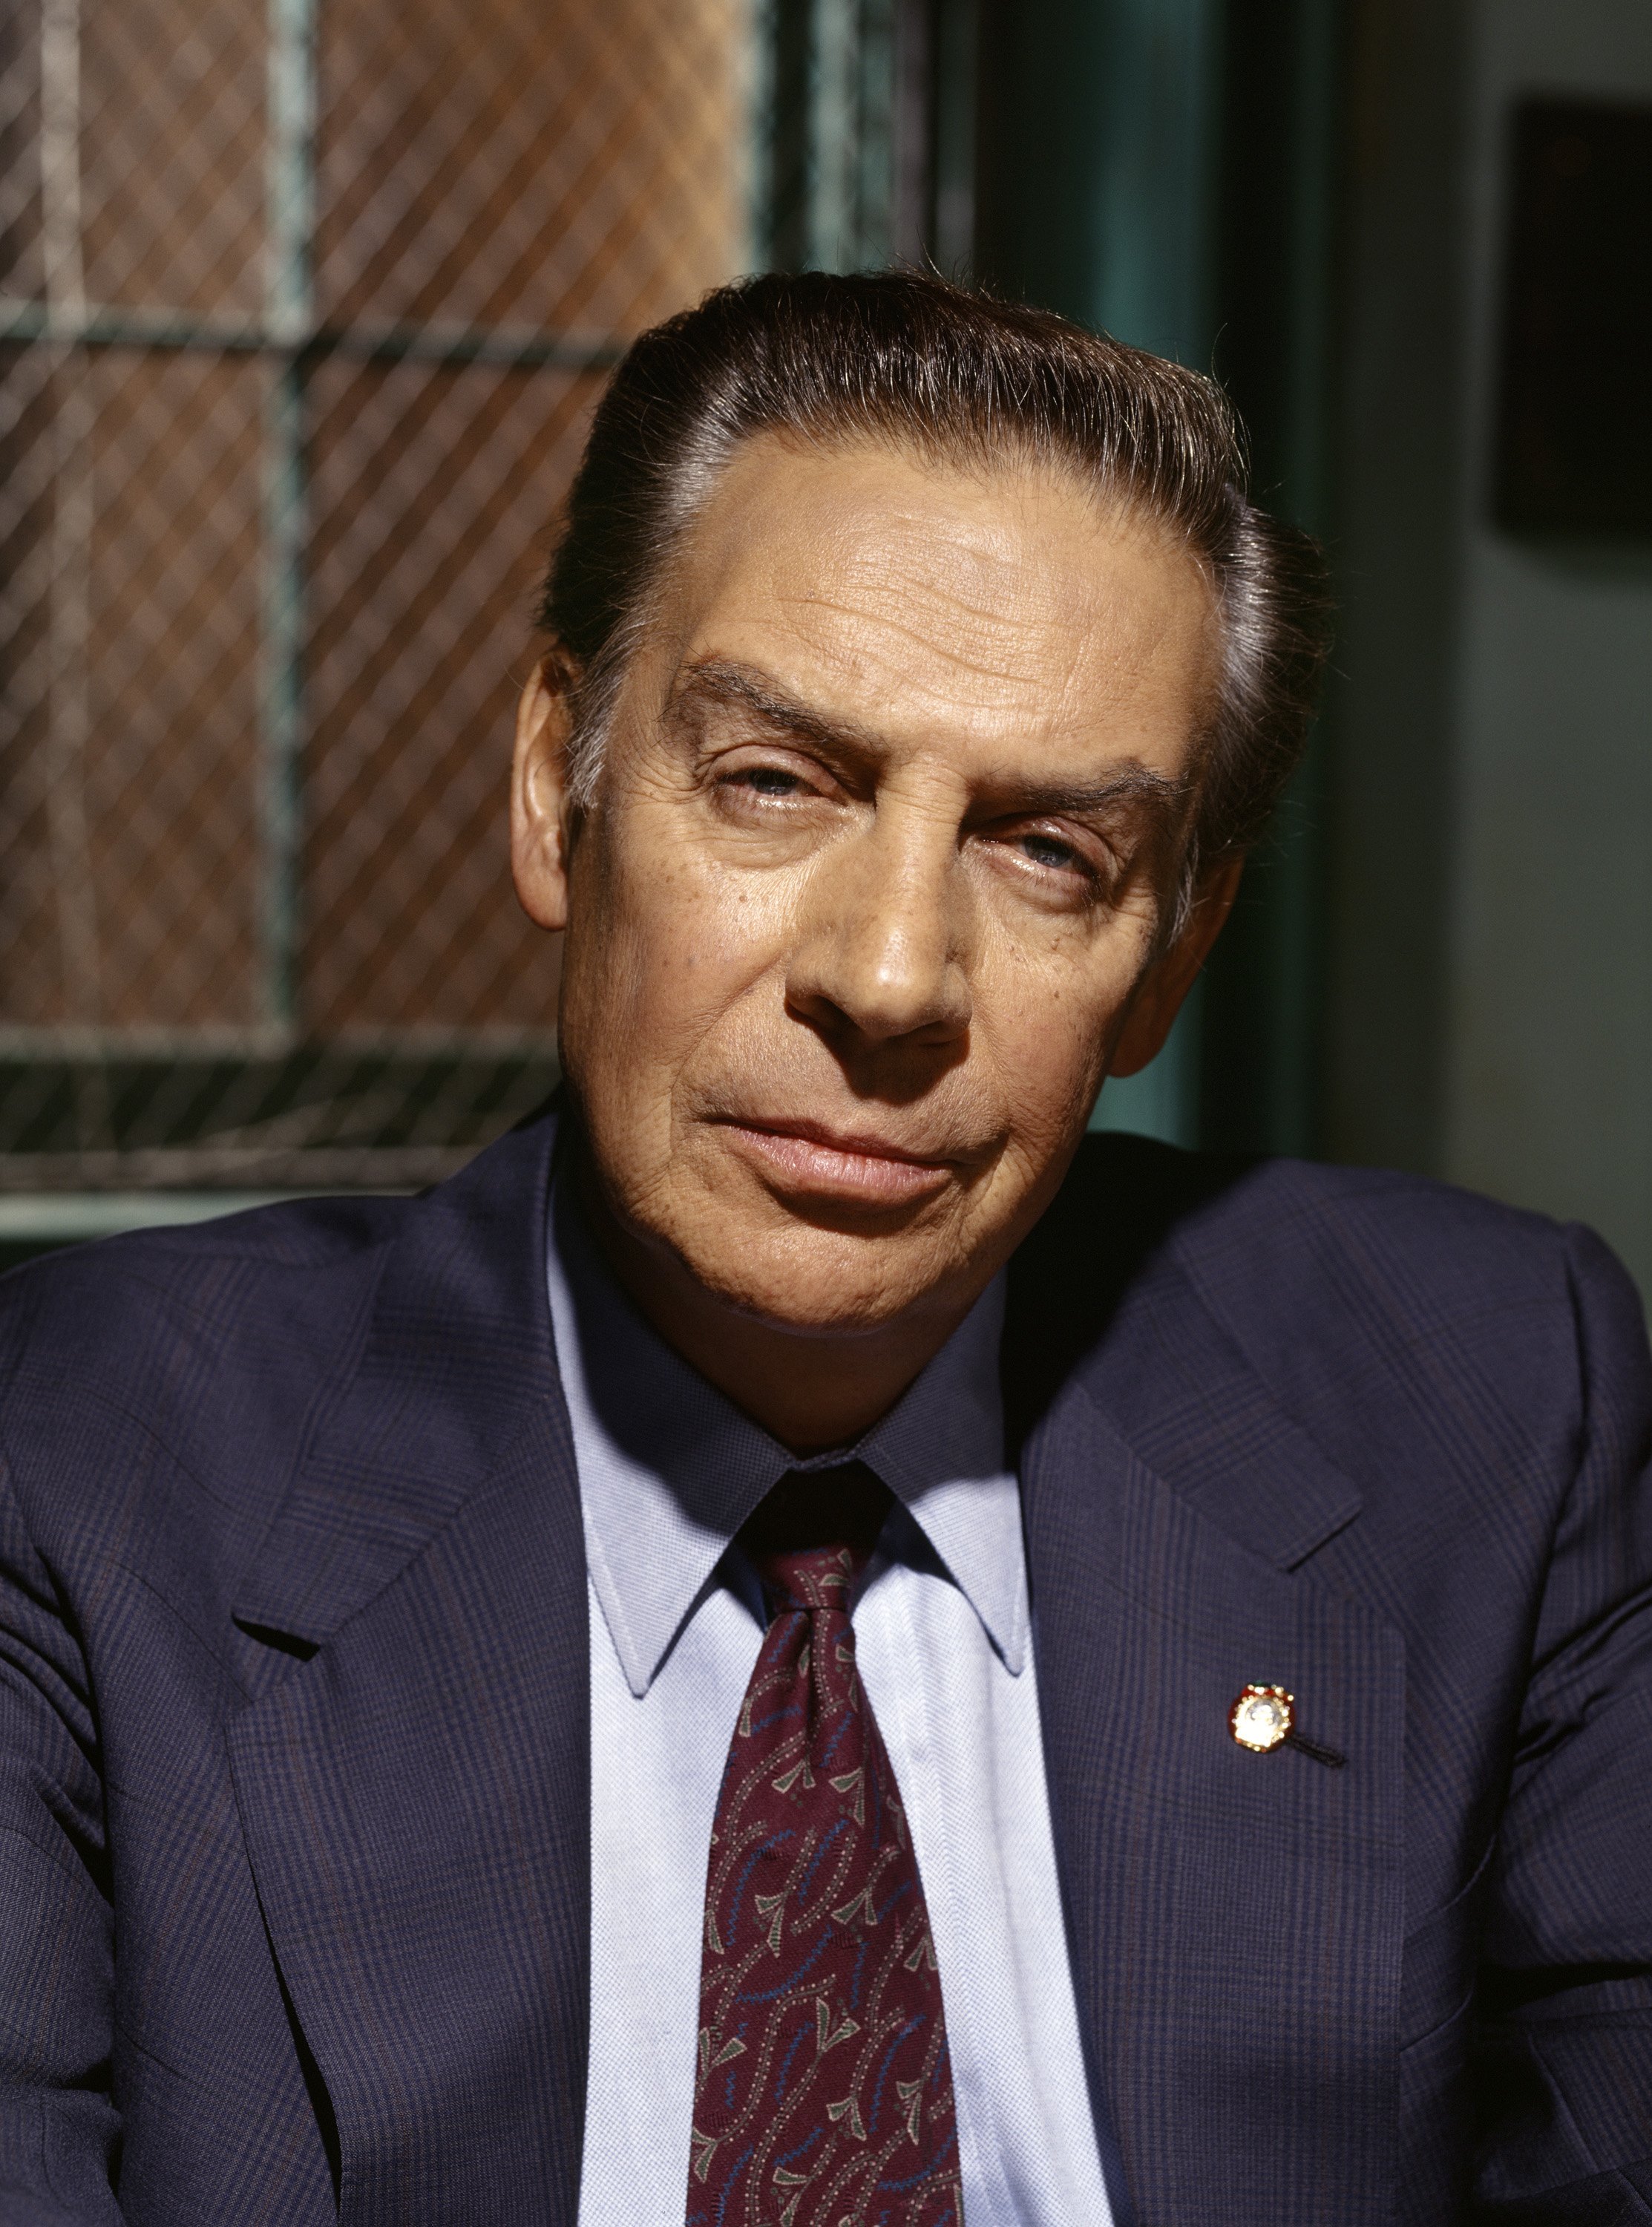 Jerry Orbach as Detective Lennie Briscoe in Season 9 of "Law & Order" | Source: Getty Images